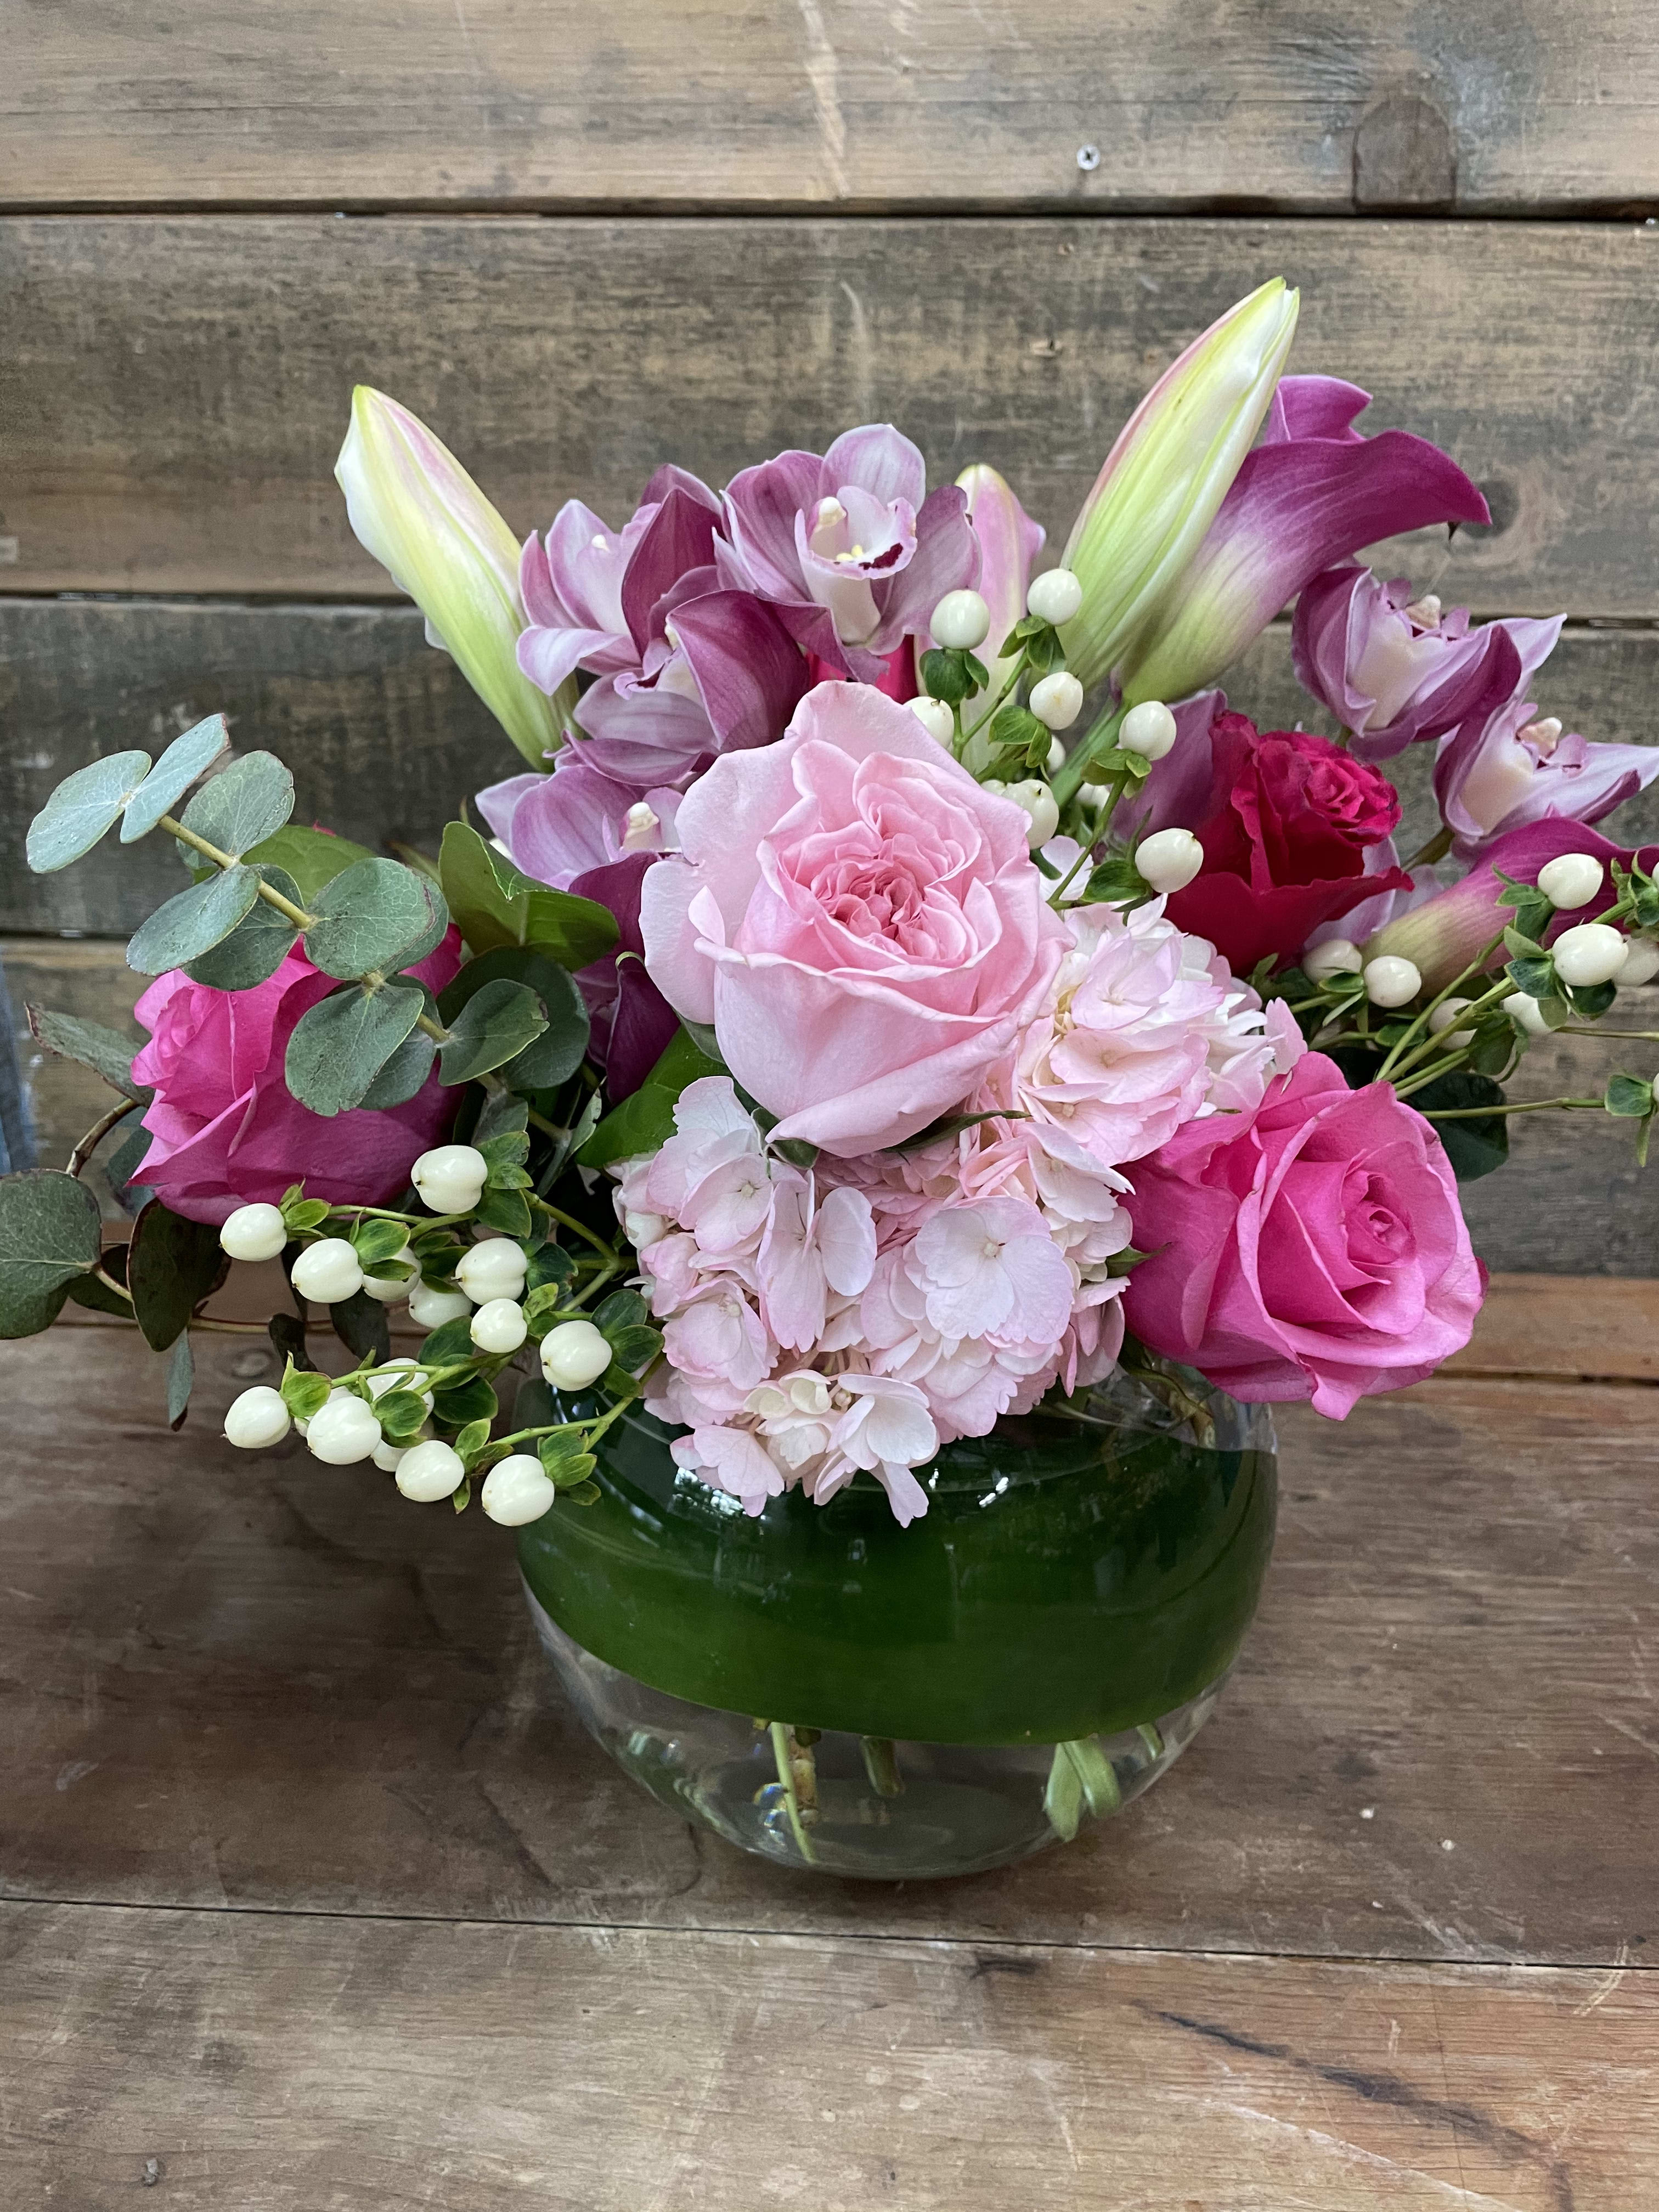 So Nice - A design that brings on a smile, varies shades of pinks and interesting blooms and greens make up this soothing design. 